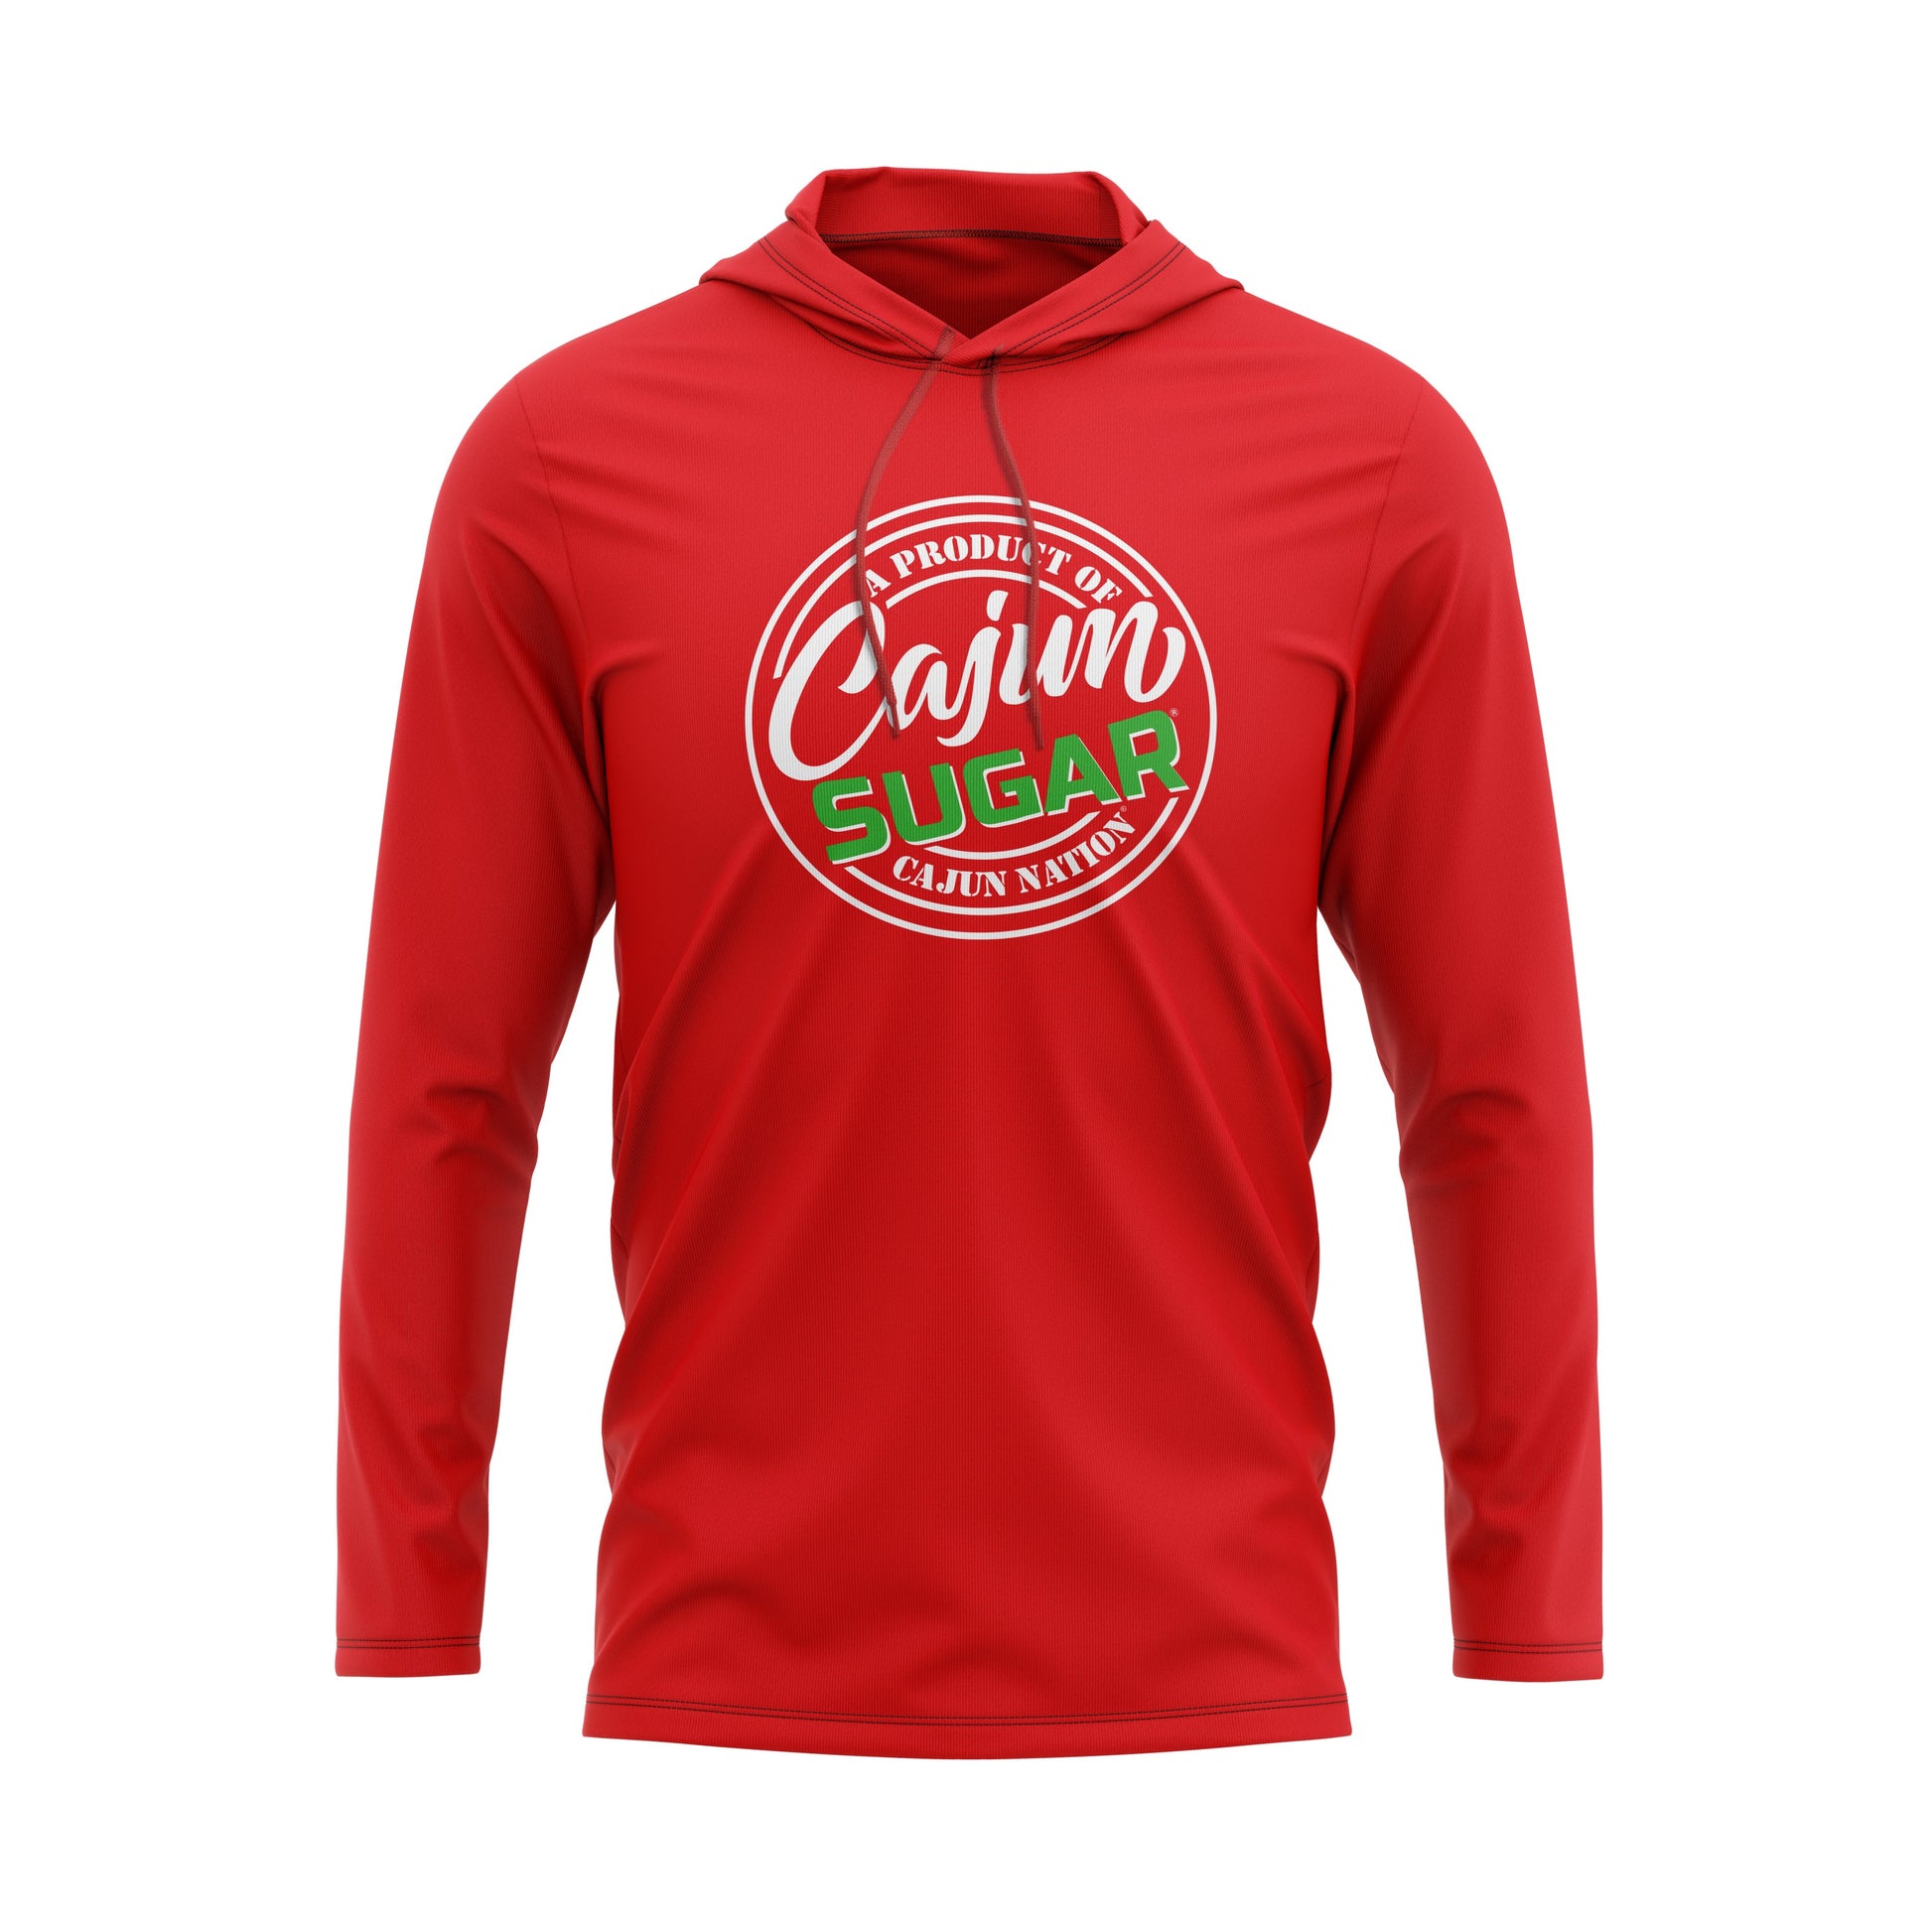  Cajun Sugar Red Lightweight Pullover Hoodie 4.3 oz., 100% combed ringspun cotton, 32 singles Heather colors are 65/35 polyester/ring spun cotton Relaxed unlined hood with contrast drawcord Double-needle neck, sleeve and bottom hem Tubular construction Plastisol print